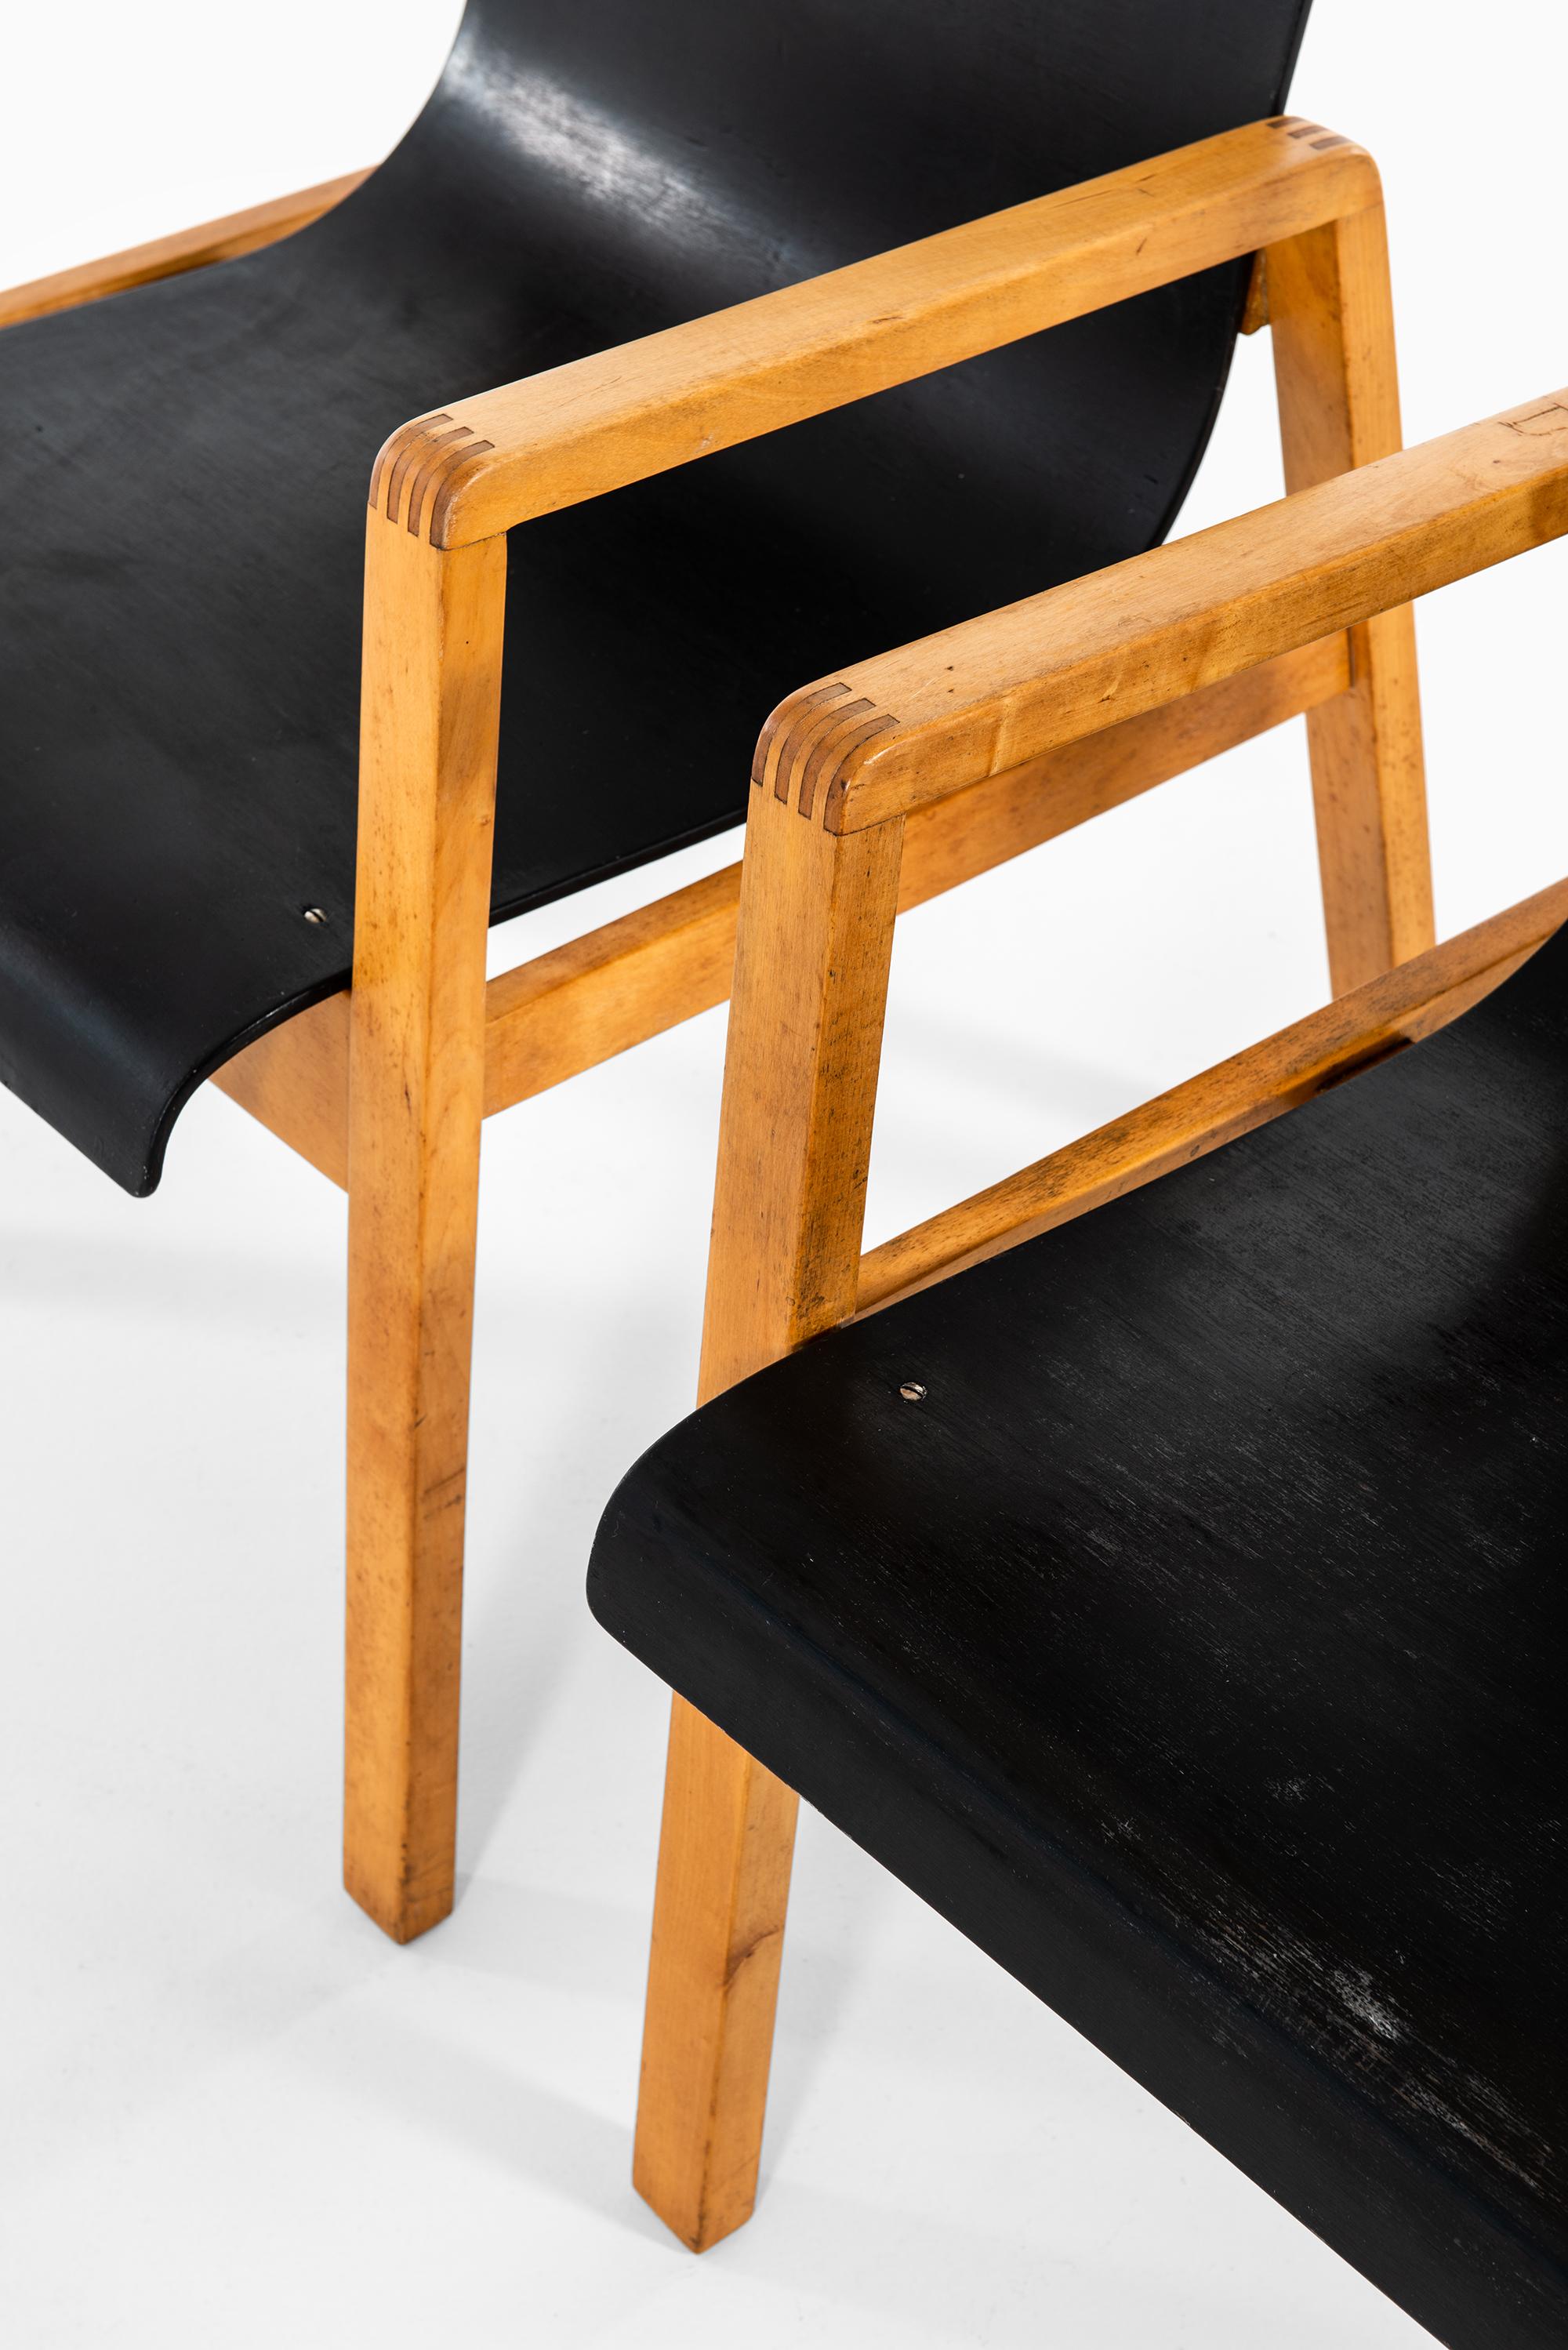 Rare pair of armchairs model 403 designed by Alvar Aalto. Produced by Artek in Finland.